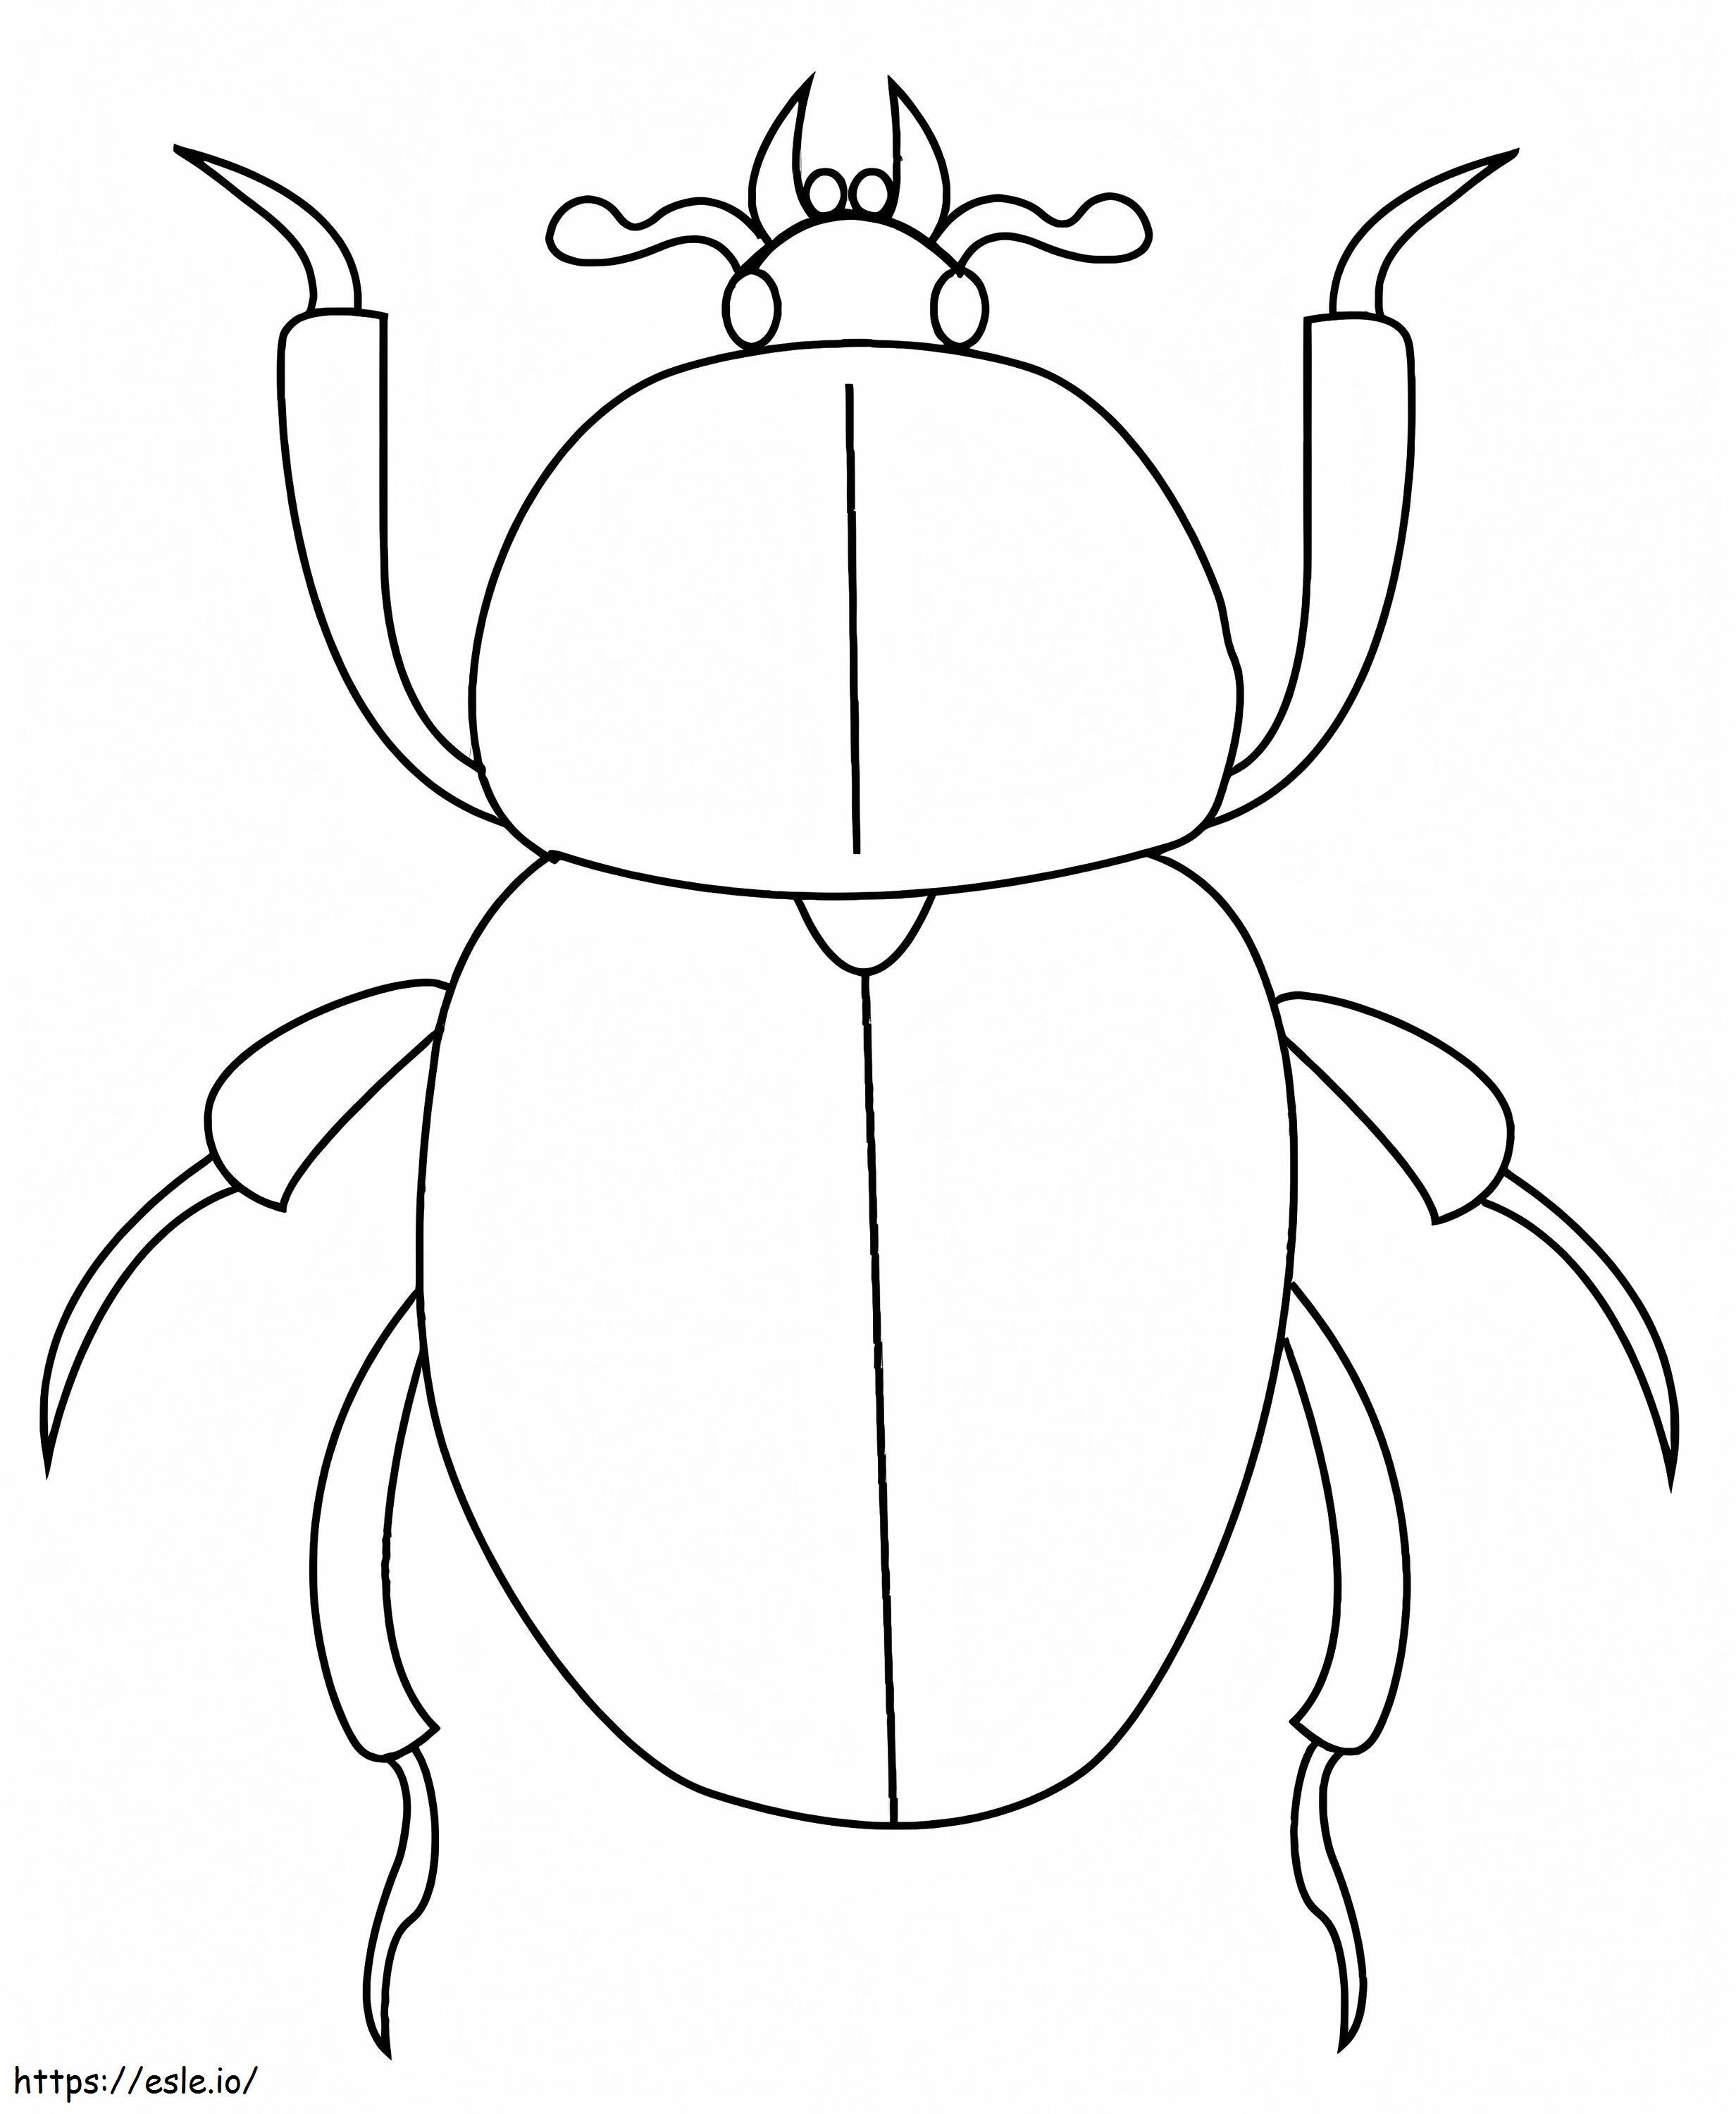 Dung Beetle coloring page